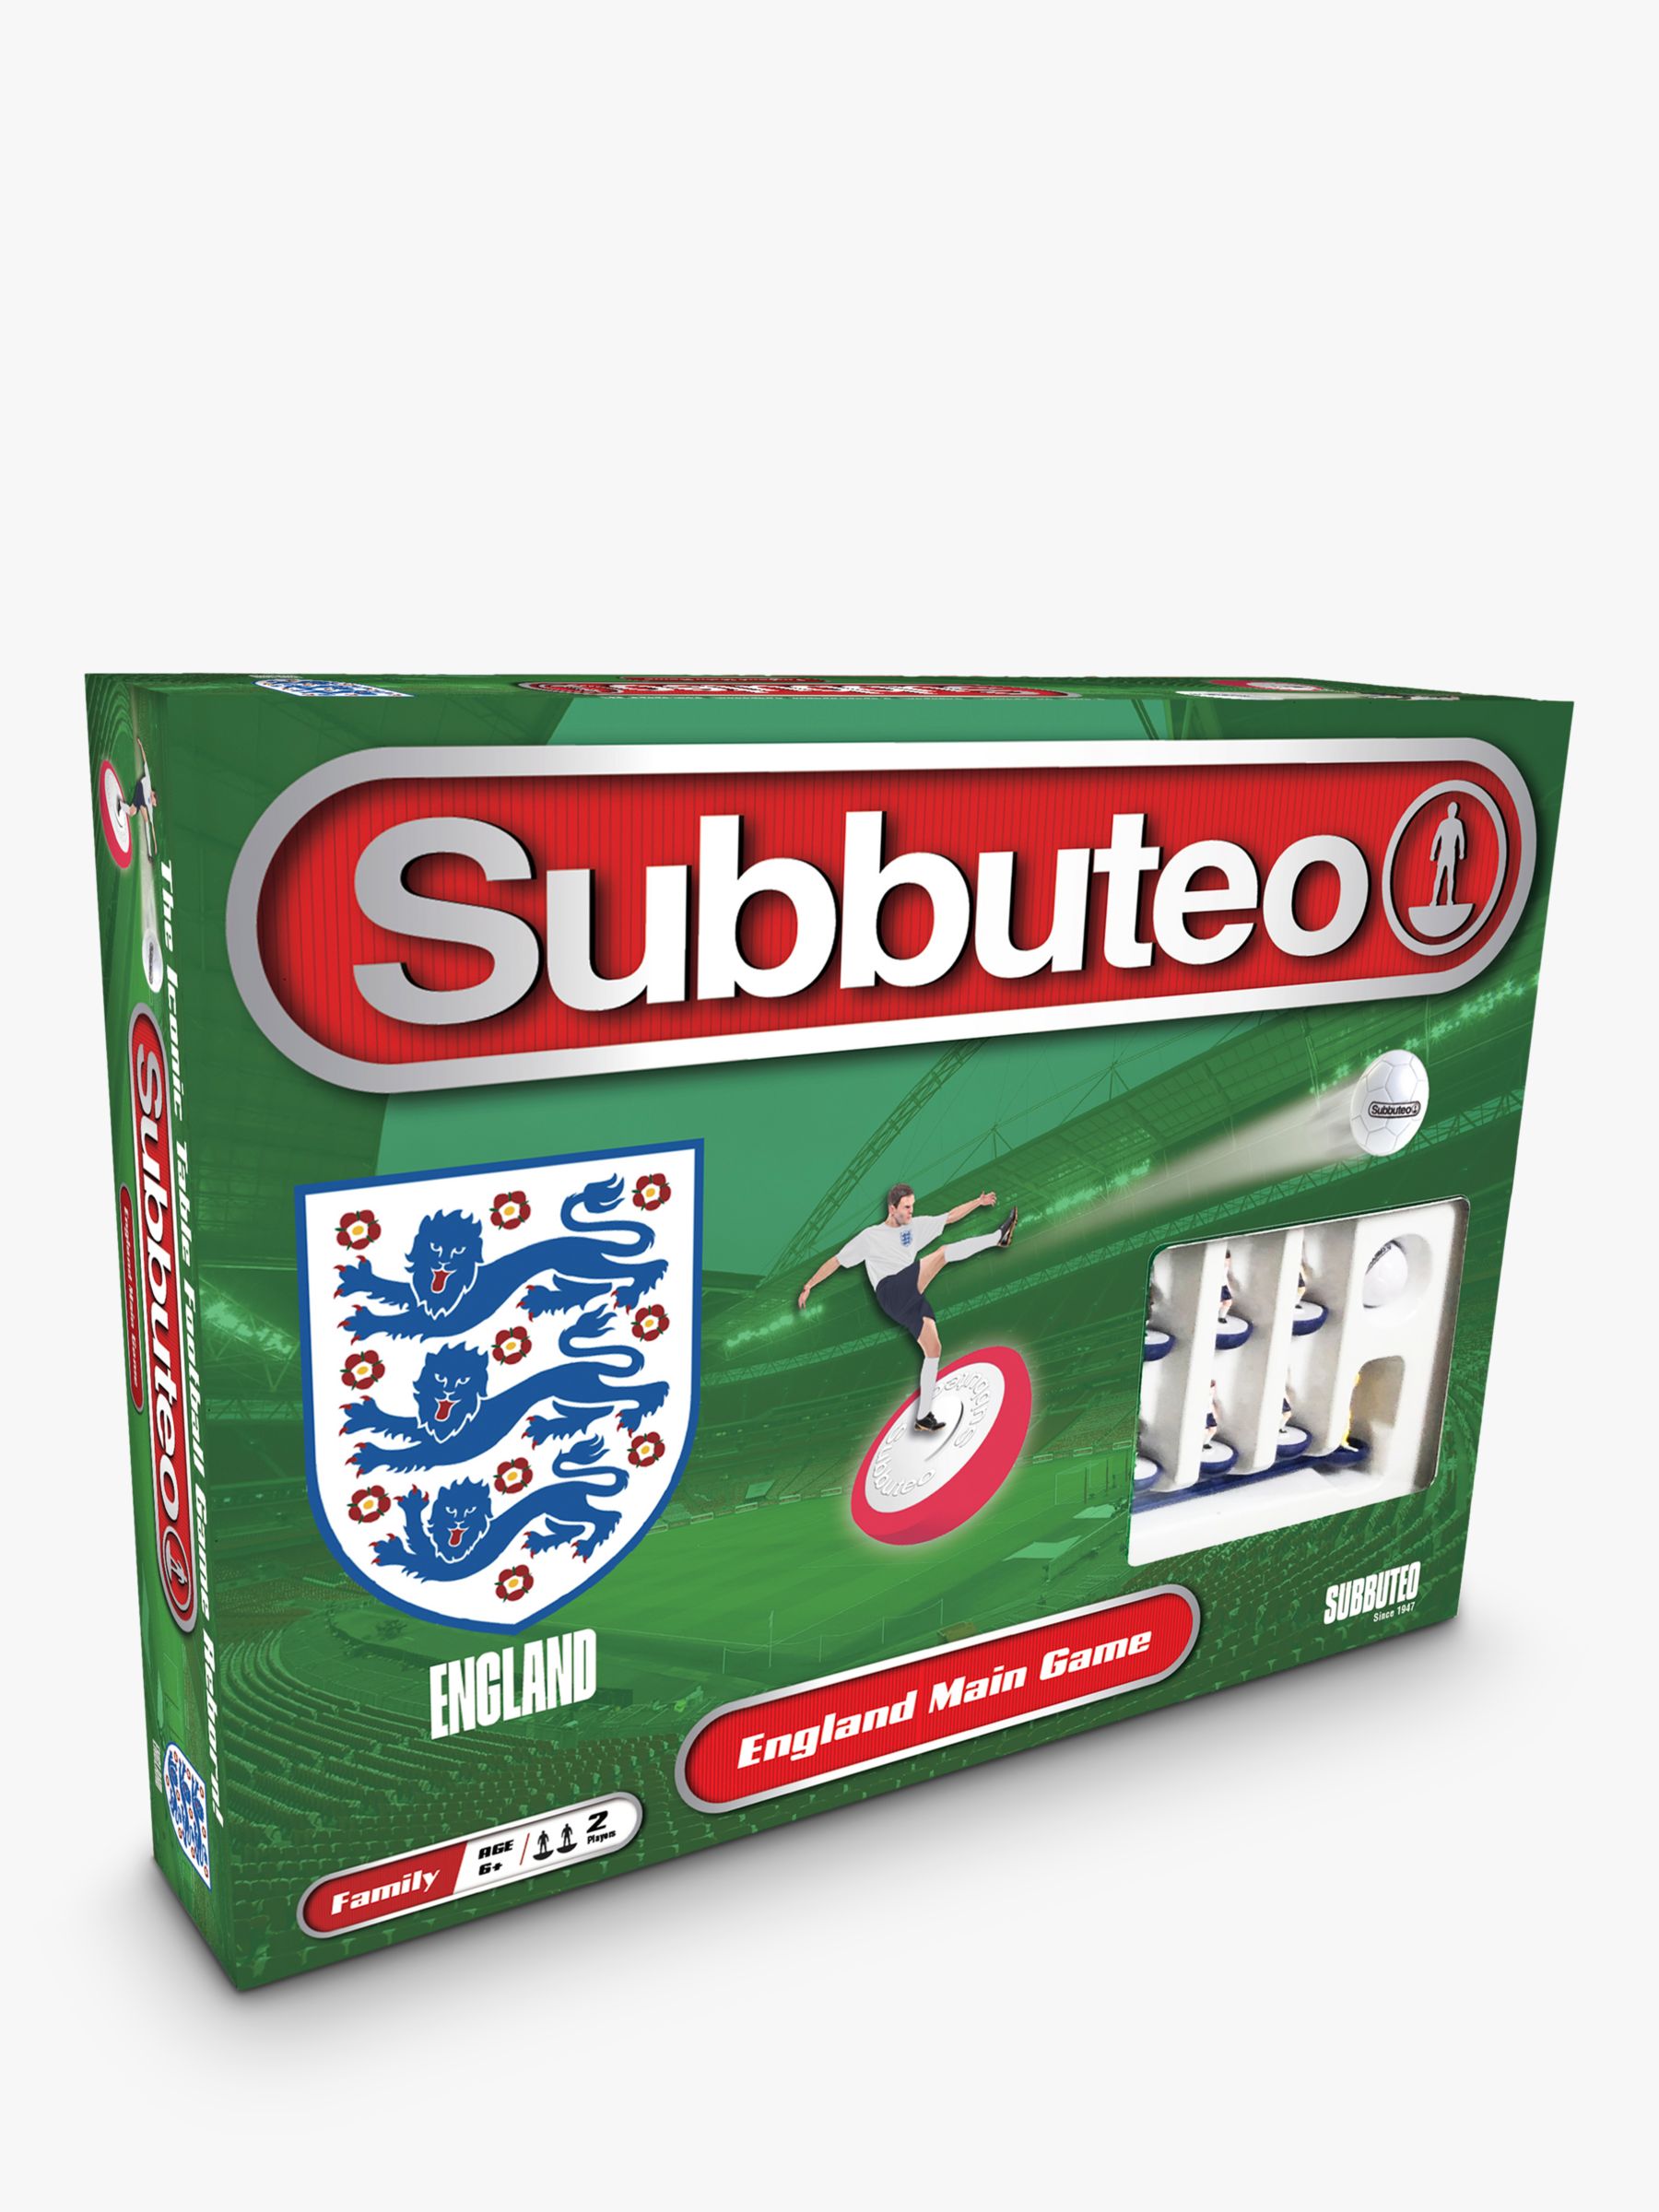 Subbuteo View All Games & Puzzles